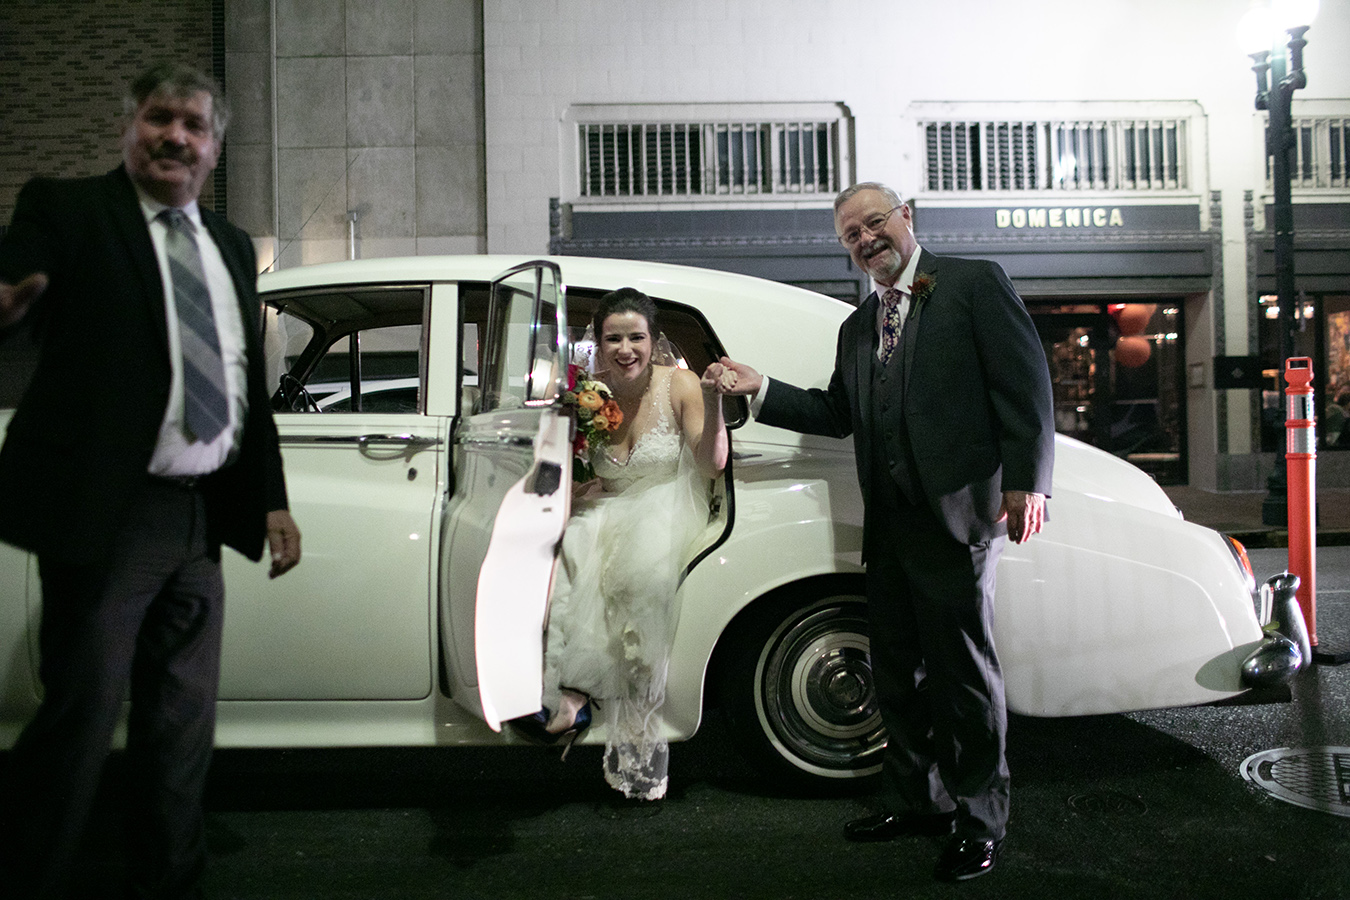 Margaret arrives at the church in a Vintage Rolls Royce from Big Easy Limos.